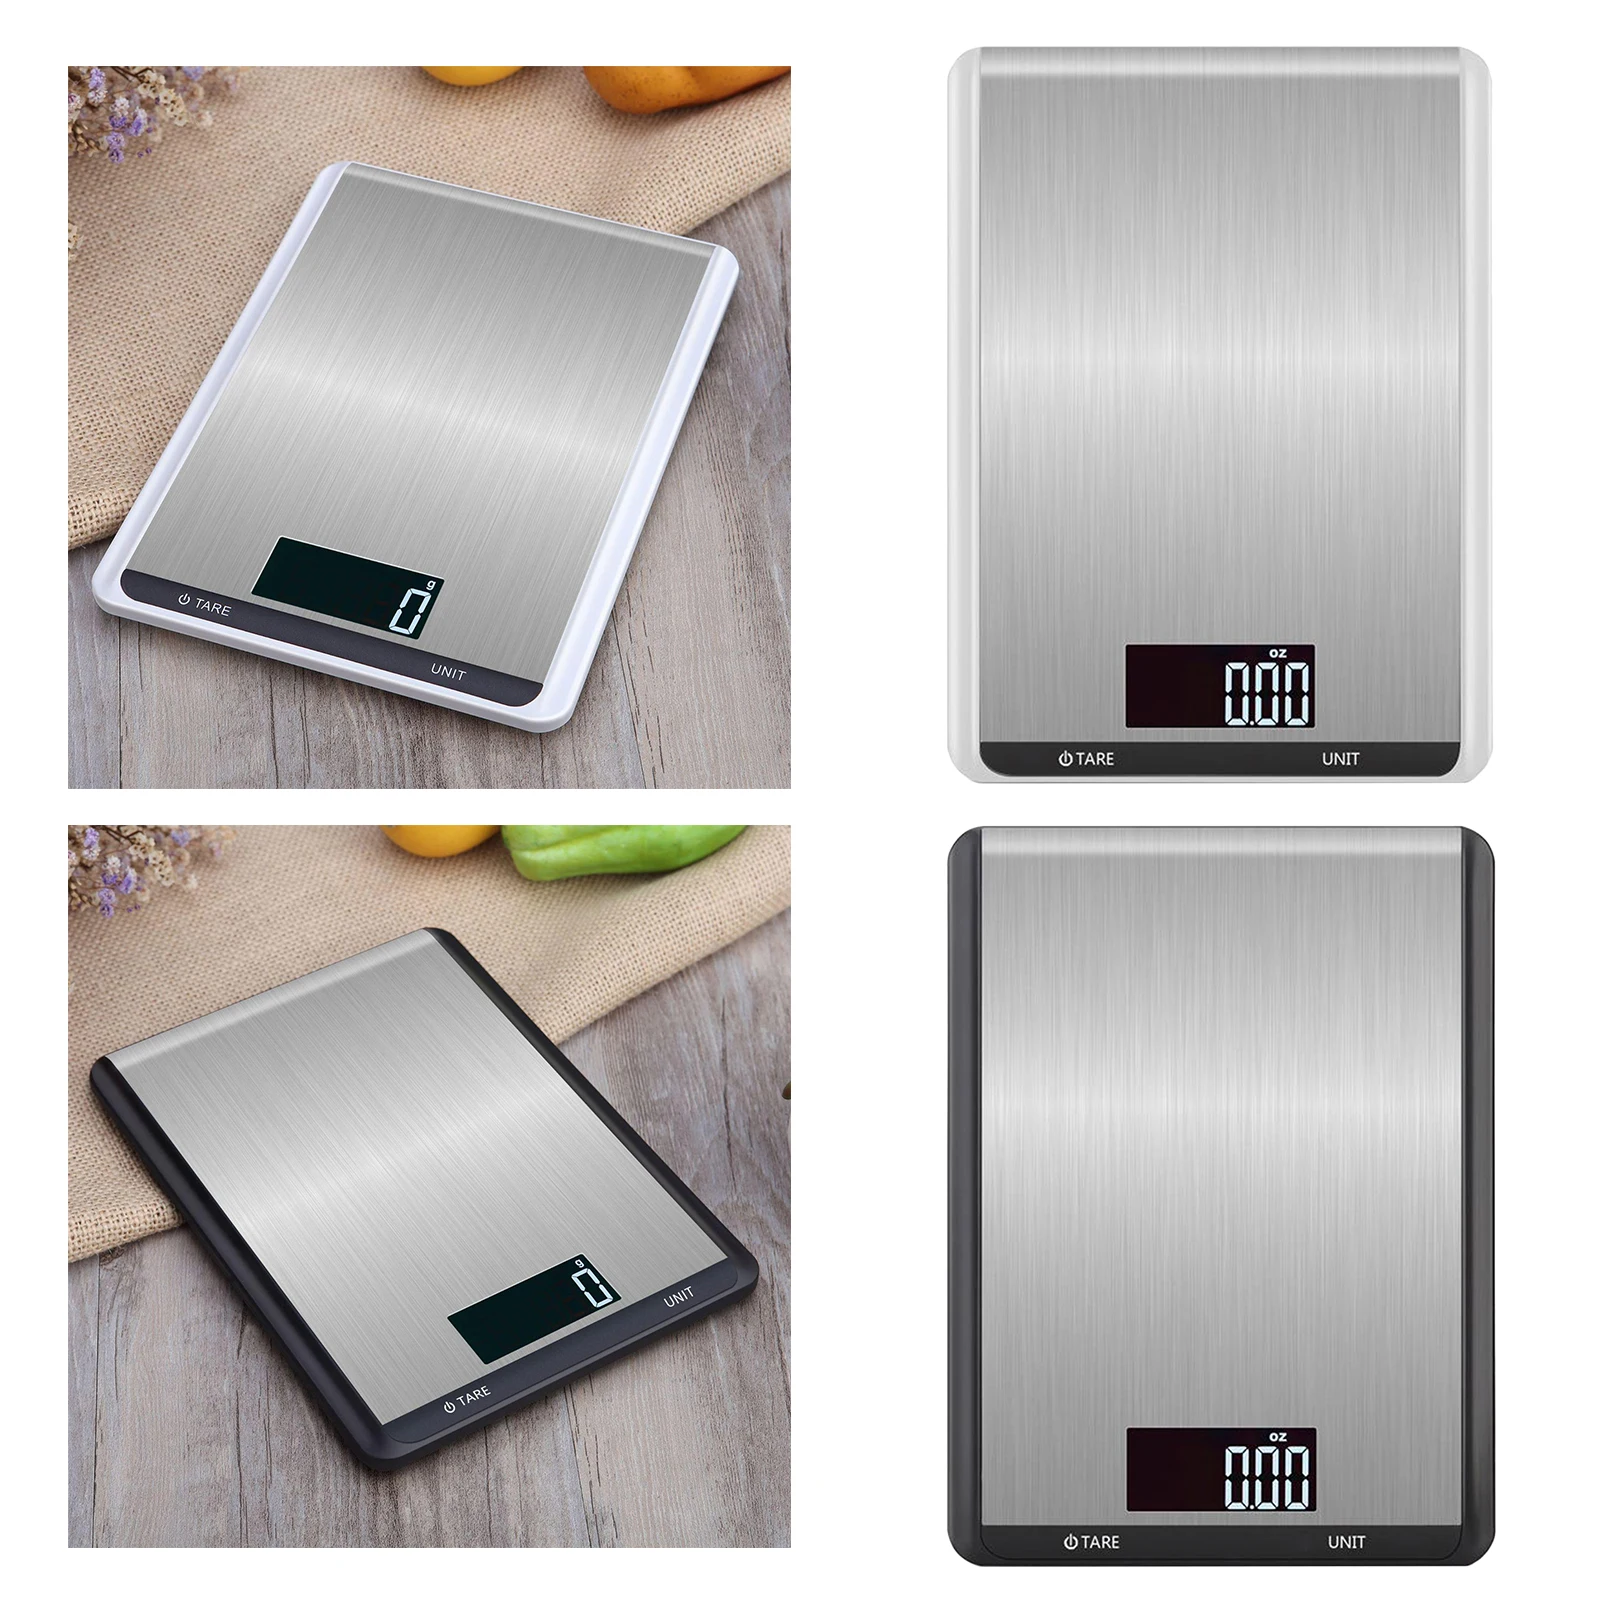 10 kg digital food stainless steel kitchen scale for meal preparation